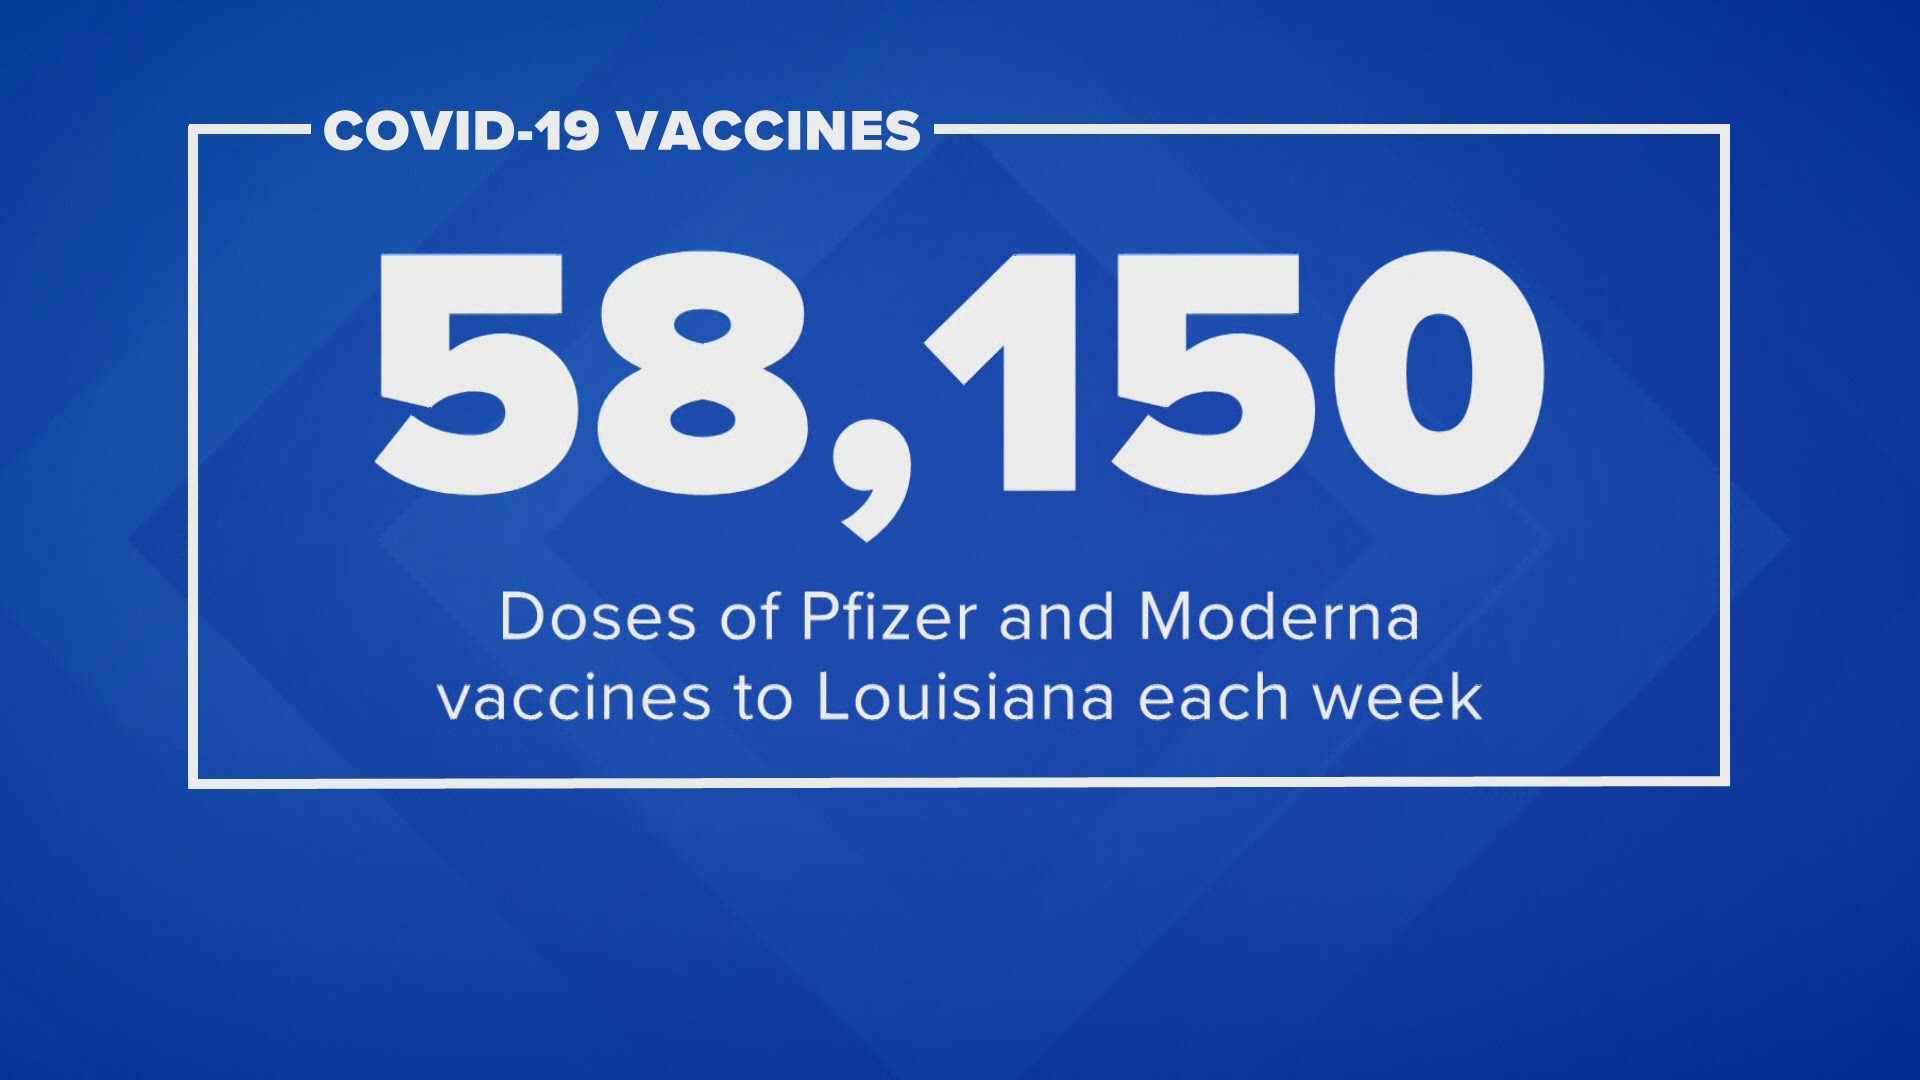 Supply and demand at the heart of Louisiana's lack of mass vaccinations